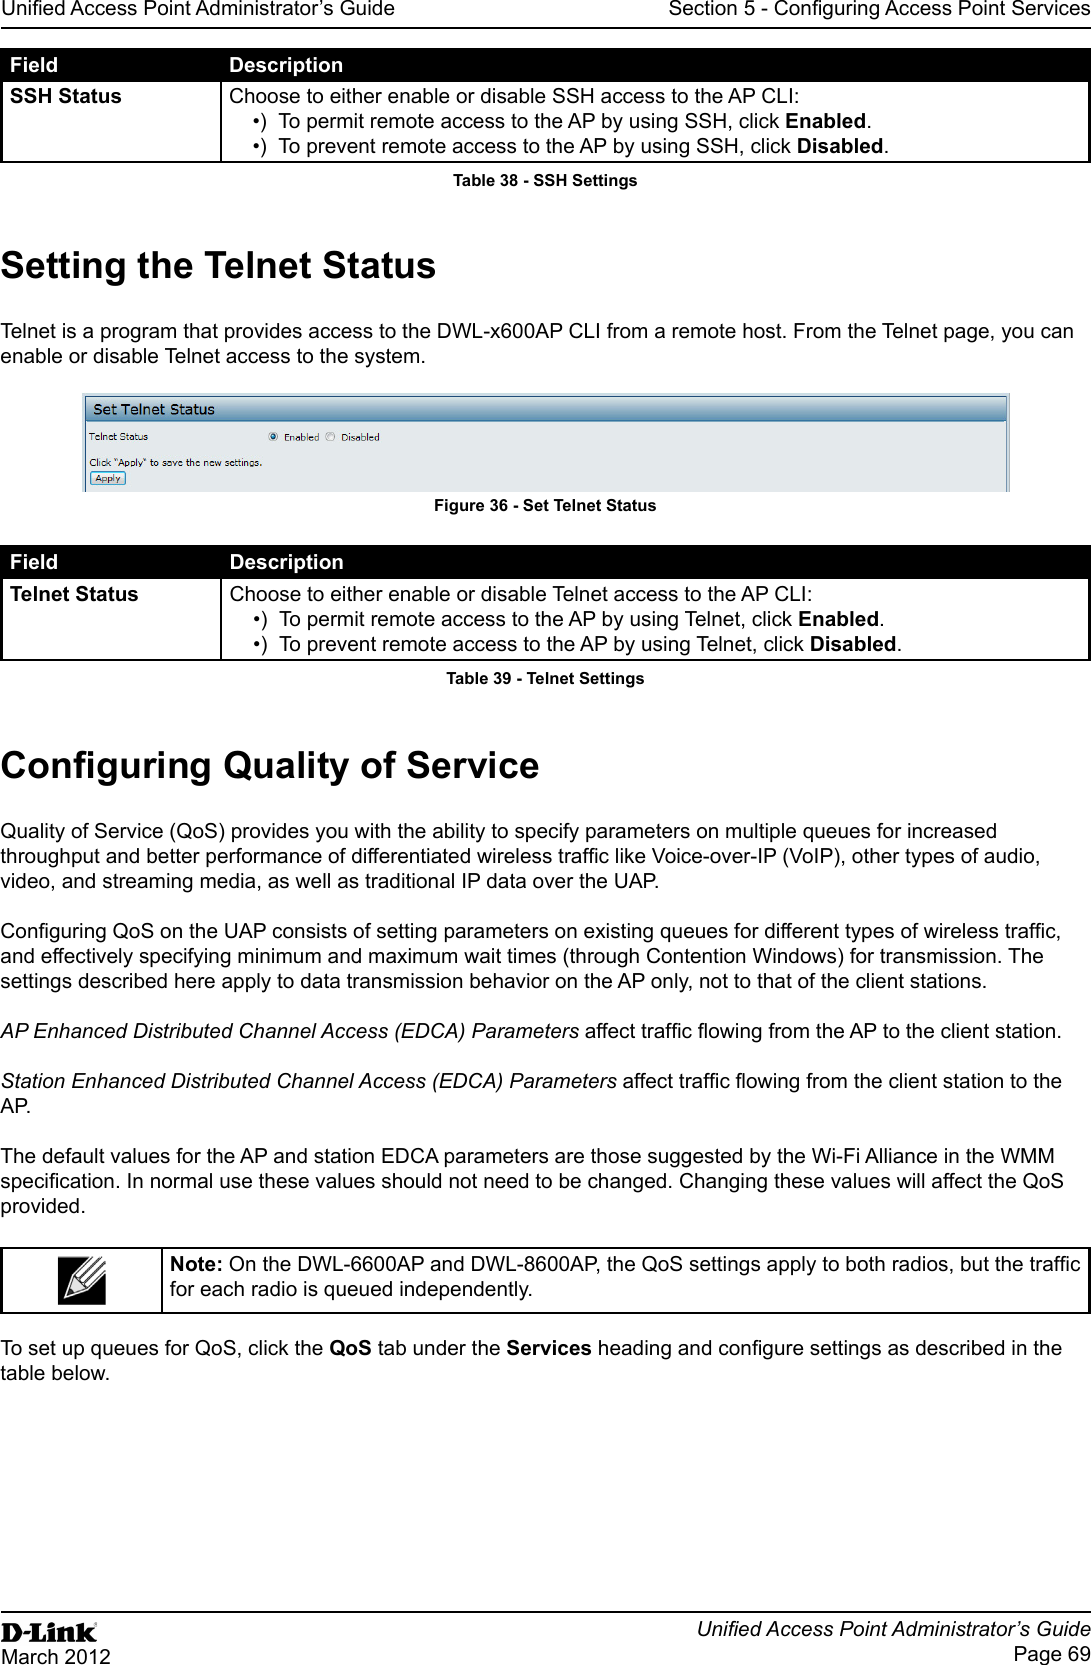 Unied Access Point Administrator’s GuideUnied Access Point Administrator’s GuidePage 69March 2012Section 5 - Conguring Access Point ServicesField DescriptionSSH Status Choose to either enable or disable SSH access to the AP CLI:•)  To permit remote access to the AP by using SSH, click Enabled.•)  To prevent remote access to the AP by using SSH, click Disabled.Table 38 - SSH SettingsSetting the Telnet StatusTelnet is a program that provides access to the DWL-x600AP CLI from a remote host. From the Telnet page, you can enable or disable Telnet access to the system. Figure 36 - Set Telnet StatusField DescriptionTelnet Status Choose to either enable or disable Telnet access to the AP CLI:•)  To permit remote access to the AP by using Telnet, click Enabled.•)  To prevent remote access to the AP by using Telnet, click Disabled.Table 39 - Telnet SettingsConguring Quality of ServiceQuality of Service (QoS) provides you with the ability to specify parameters on multiple queues for increased throughput and better performance of differentiated wireless trafc like Voice-over-IP (VoIP), other types of audio, video, and streaming media, as well as traditional IP data over the UAP.Conguring QoS on the UAP consists of setting parameters on existing queues for different types of wireless trafc, and effectively specifying minimum and maximum wait times (through Contention Windows) for transmission. The settings described here apply to data transmission behavior on the AP only, not to that of the client stations.AP Enhanced Distributed Channel Access (EDCA) Parameters affect trafc owing from the AP to the client station.Station Enhanced Distributed Channel Access (EDCA) Parameters affect trafc owing from the client station to the A P.The default values for the AP and station EDCA parameters are those suggested by the Wi-Fi Alliance in the WMM specication. In normal use these values should not need to be changed. Changing these values will affect the QoS provided.Note: On the DWL-6600AP and DWL-8600AP, the QoS settings apply to both radios, but the trafc for each radio is queued independently. To set up queues for QoS, click the QoS tab under the Services heading and congure settings as described in the table below.